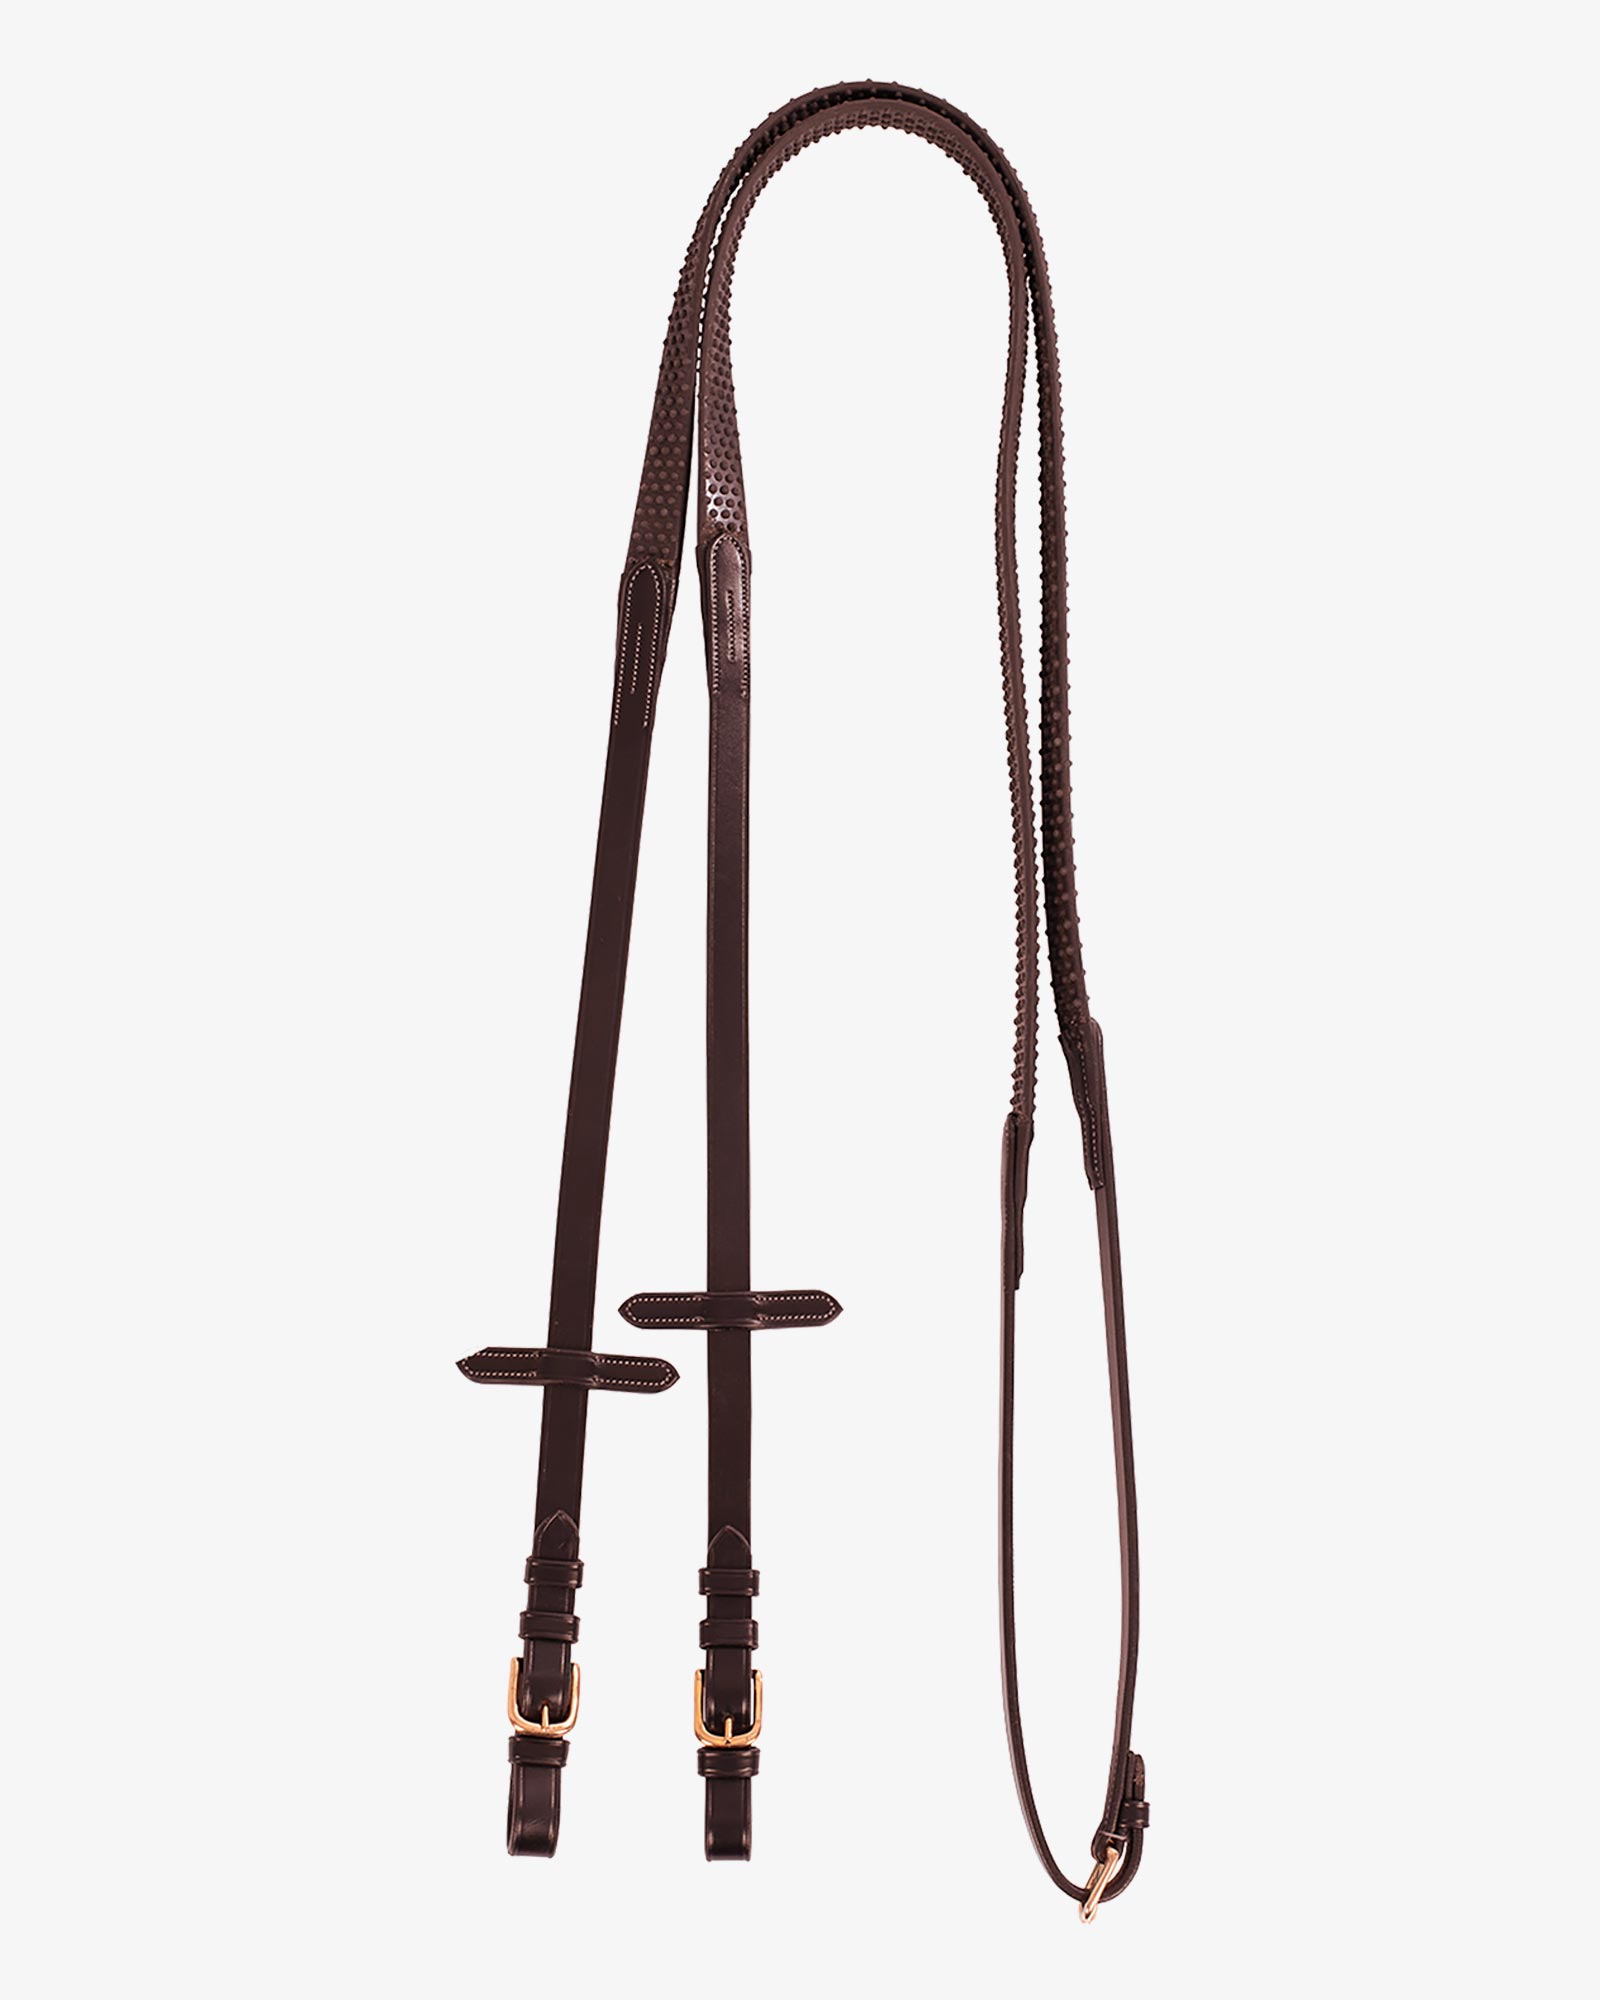 Rosegold Leather Halter - The Dressage Pony Store